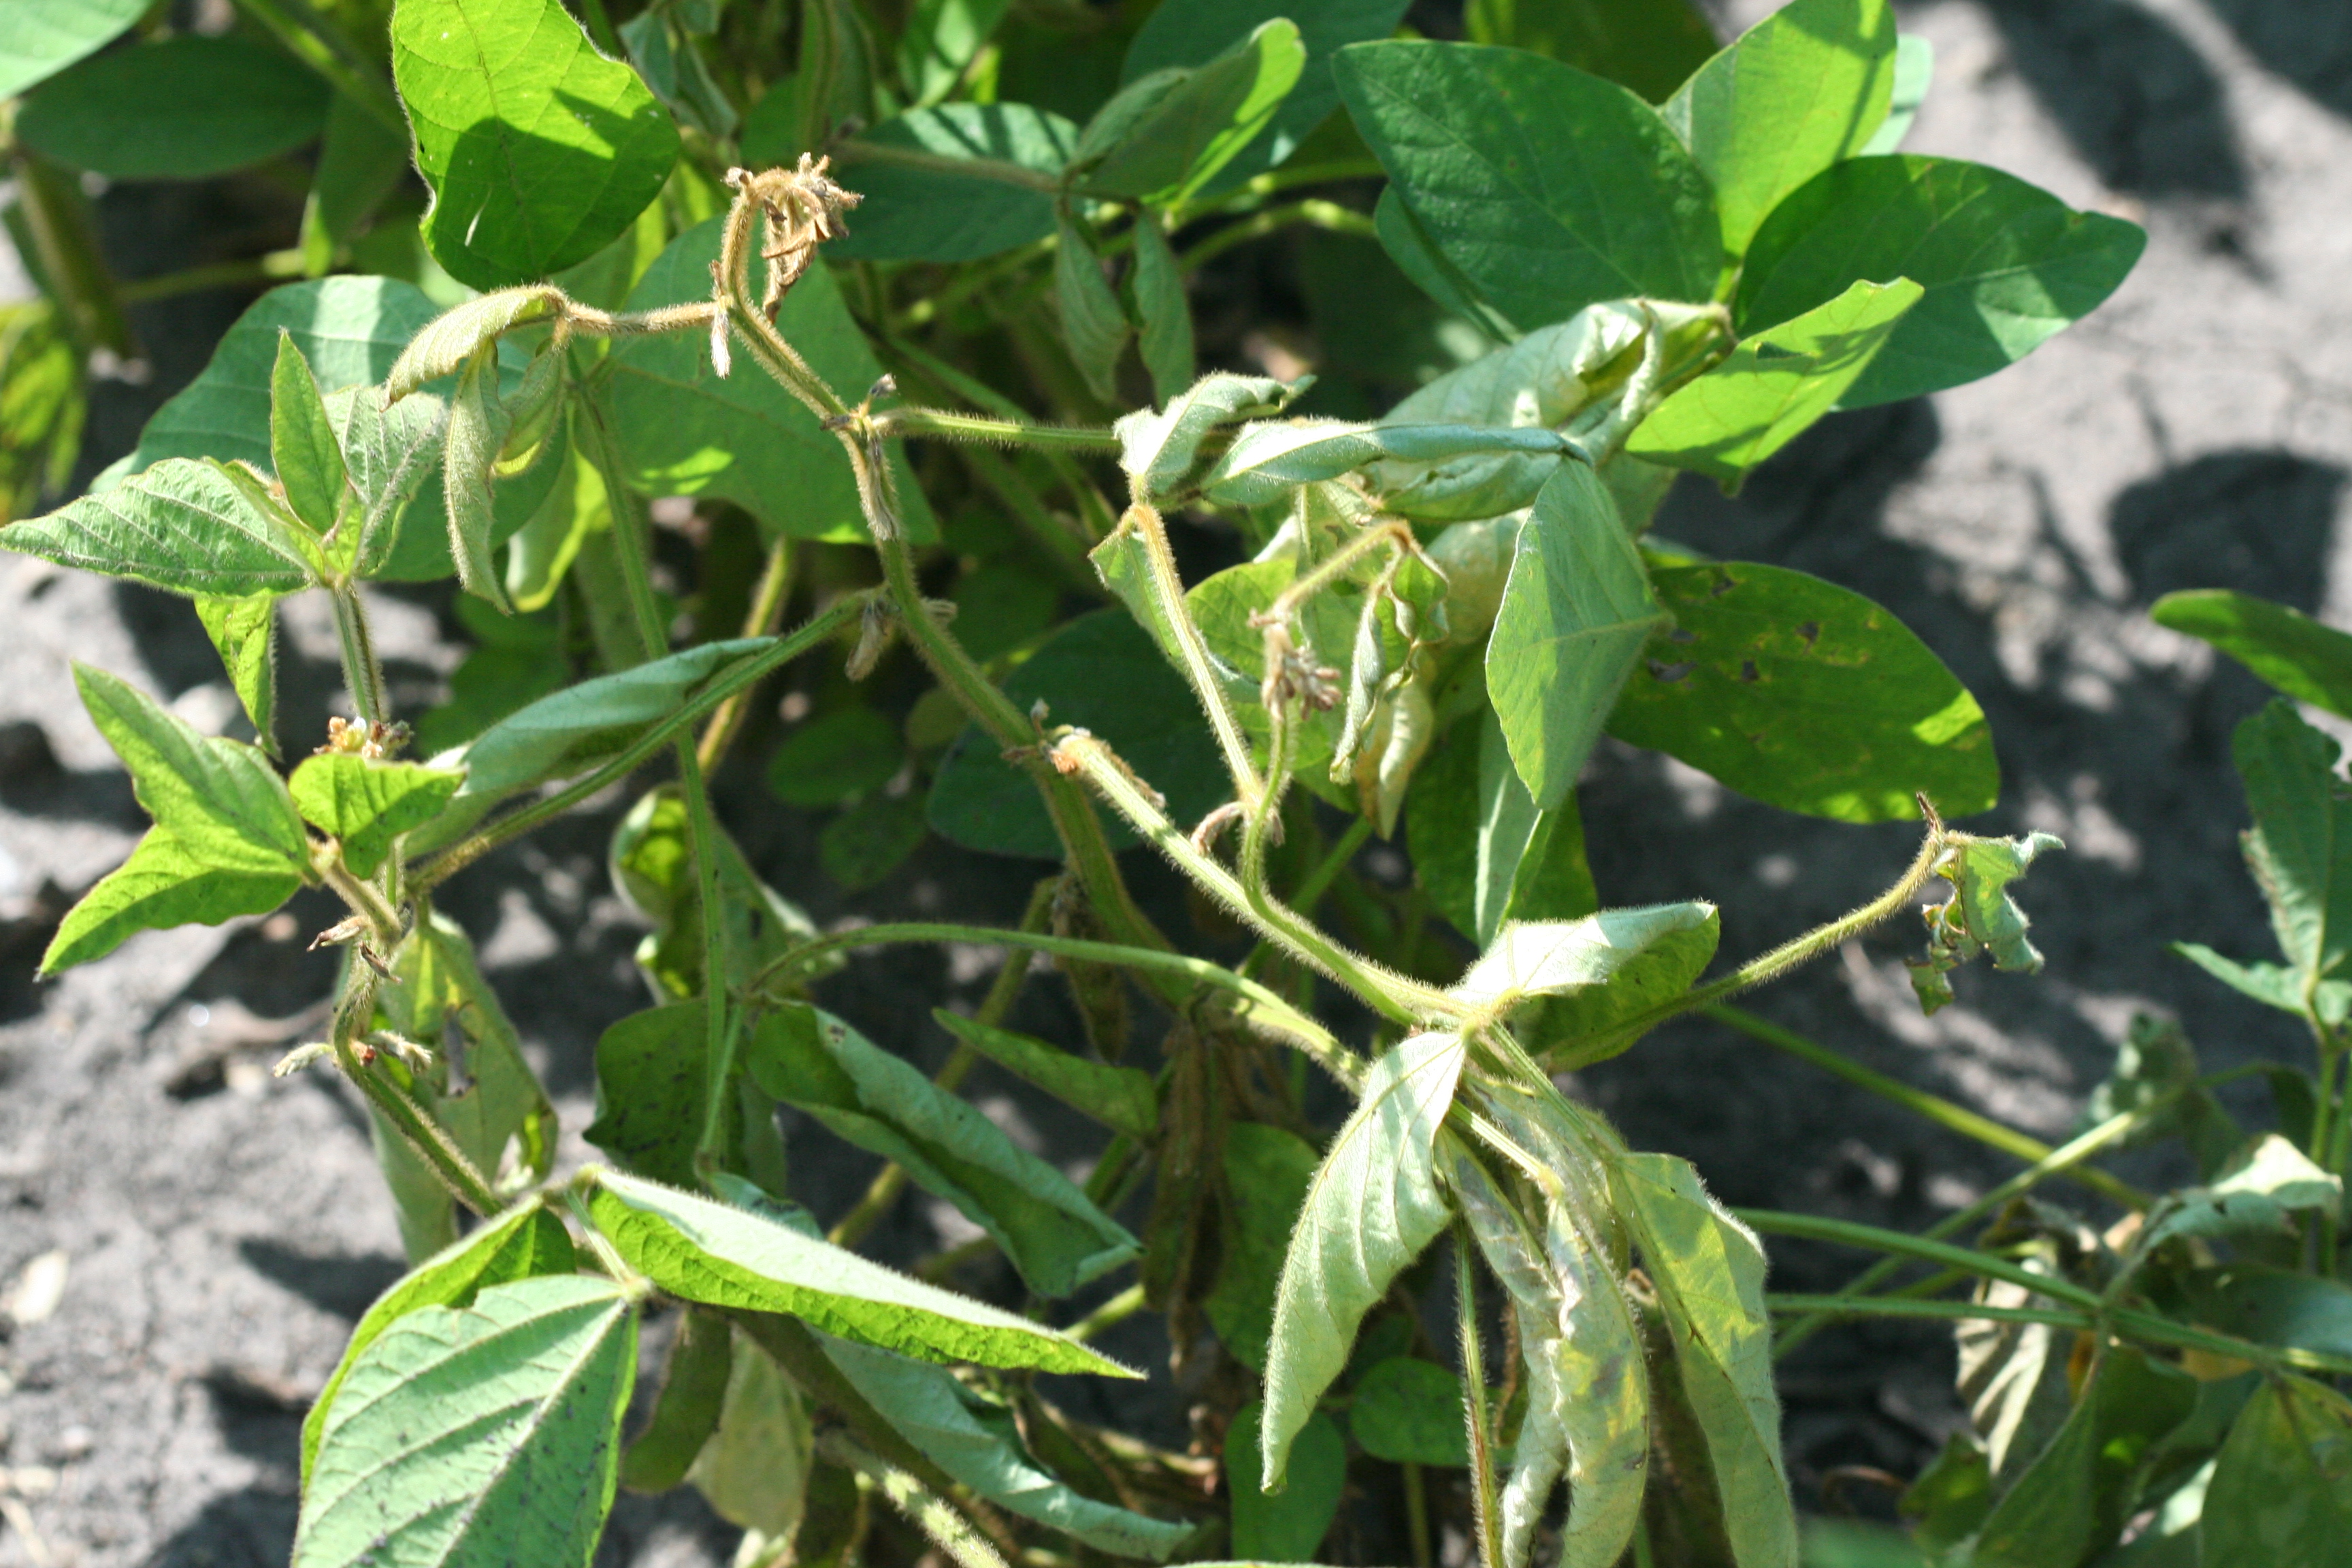 Wilting of soybean stem tips is a symptom of Fusarium root rot and wilt.